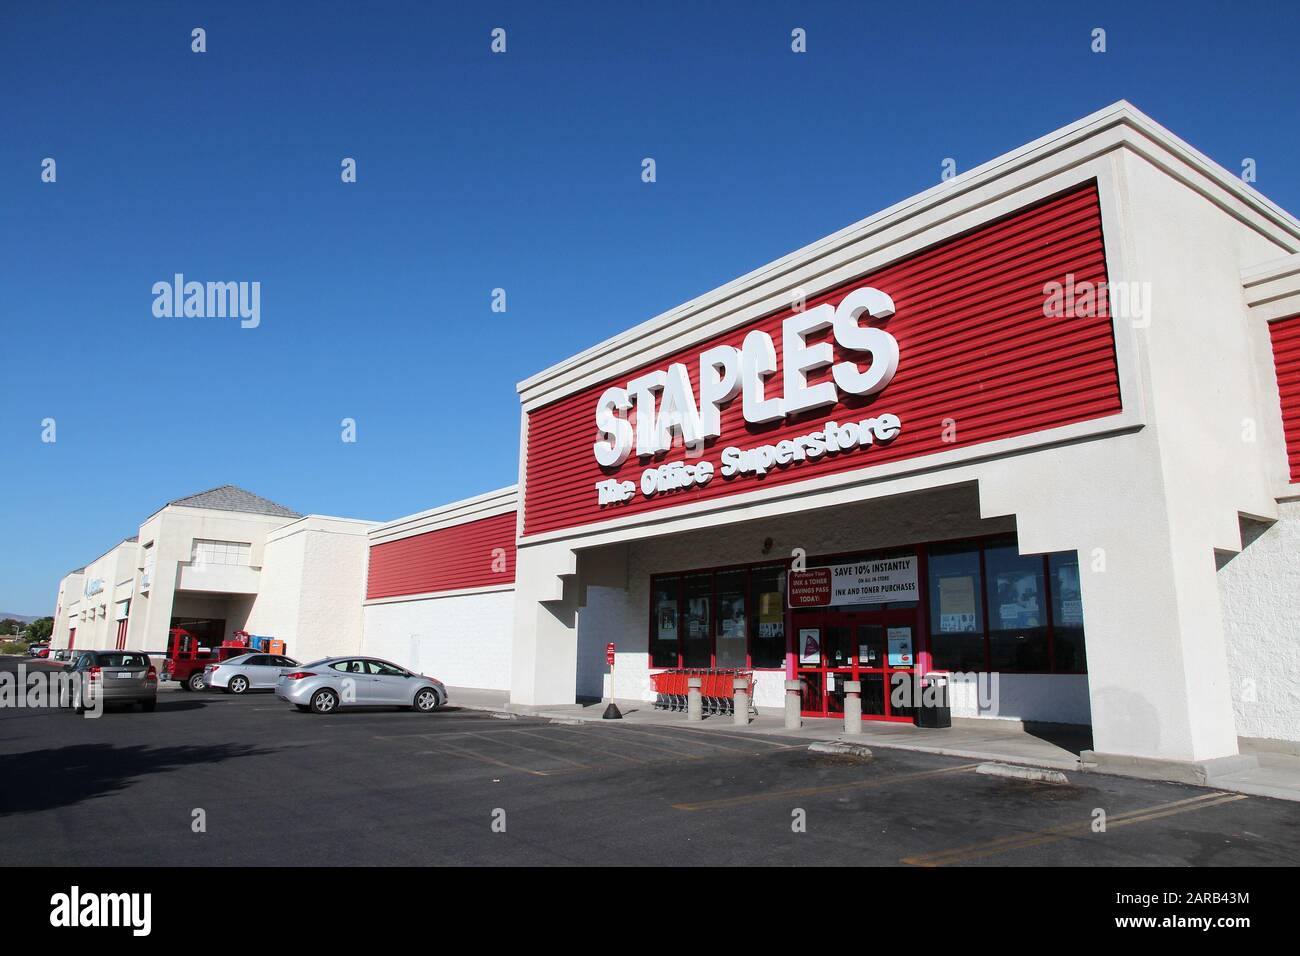 RIDGECREST, UNITED STATES - APRIL 13, 2014: Staples Office Superstore in Ridgecrest, California. The office supply store chain has more than 2,200 sto Stock Photo